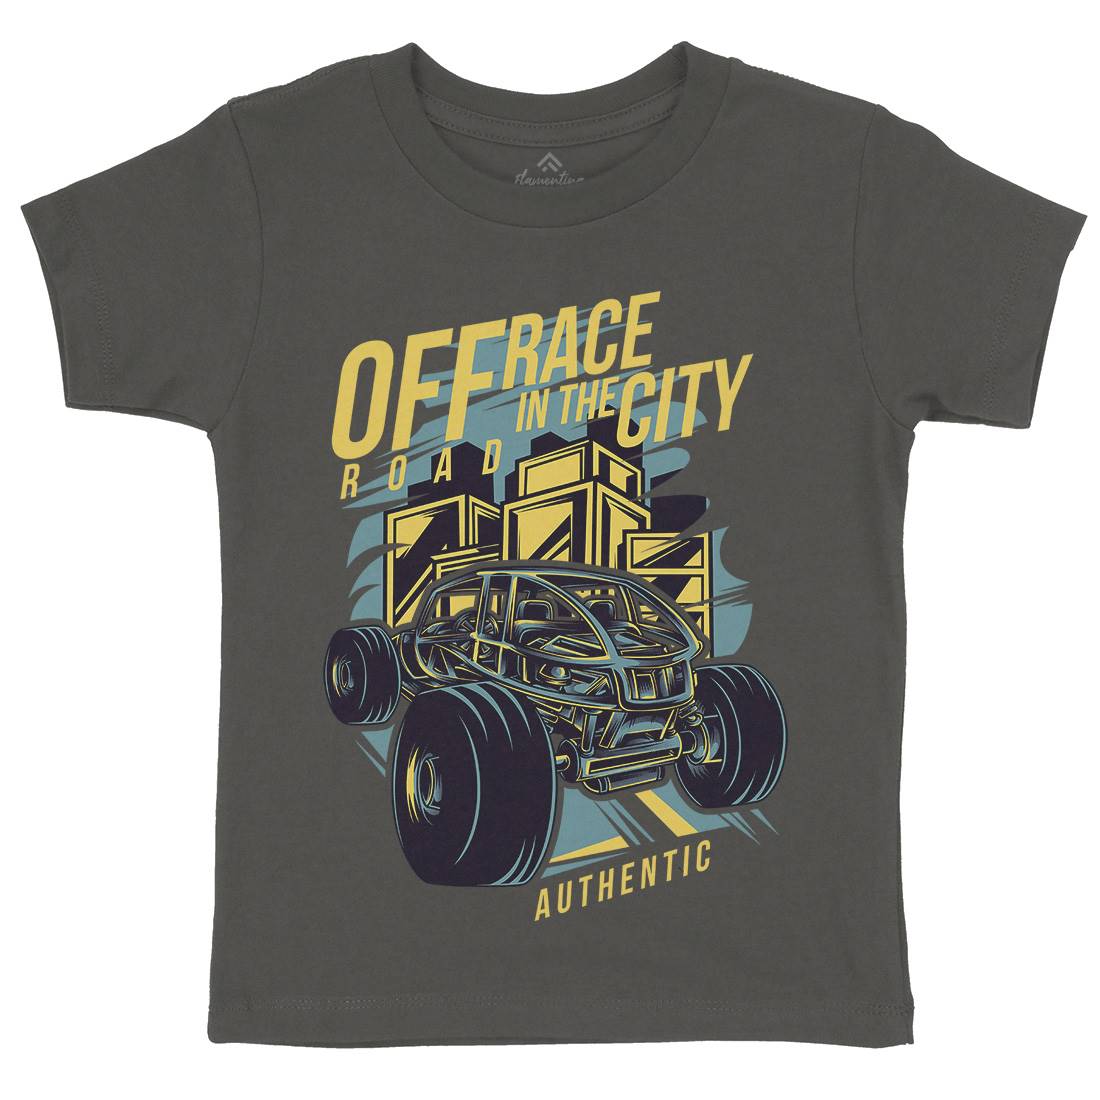 Race In The City Kids Crew Neck T-Shirt Cars D687